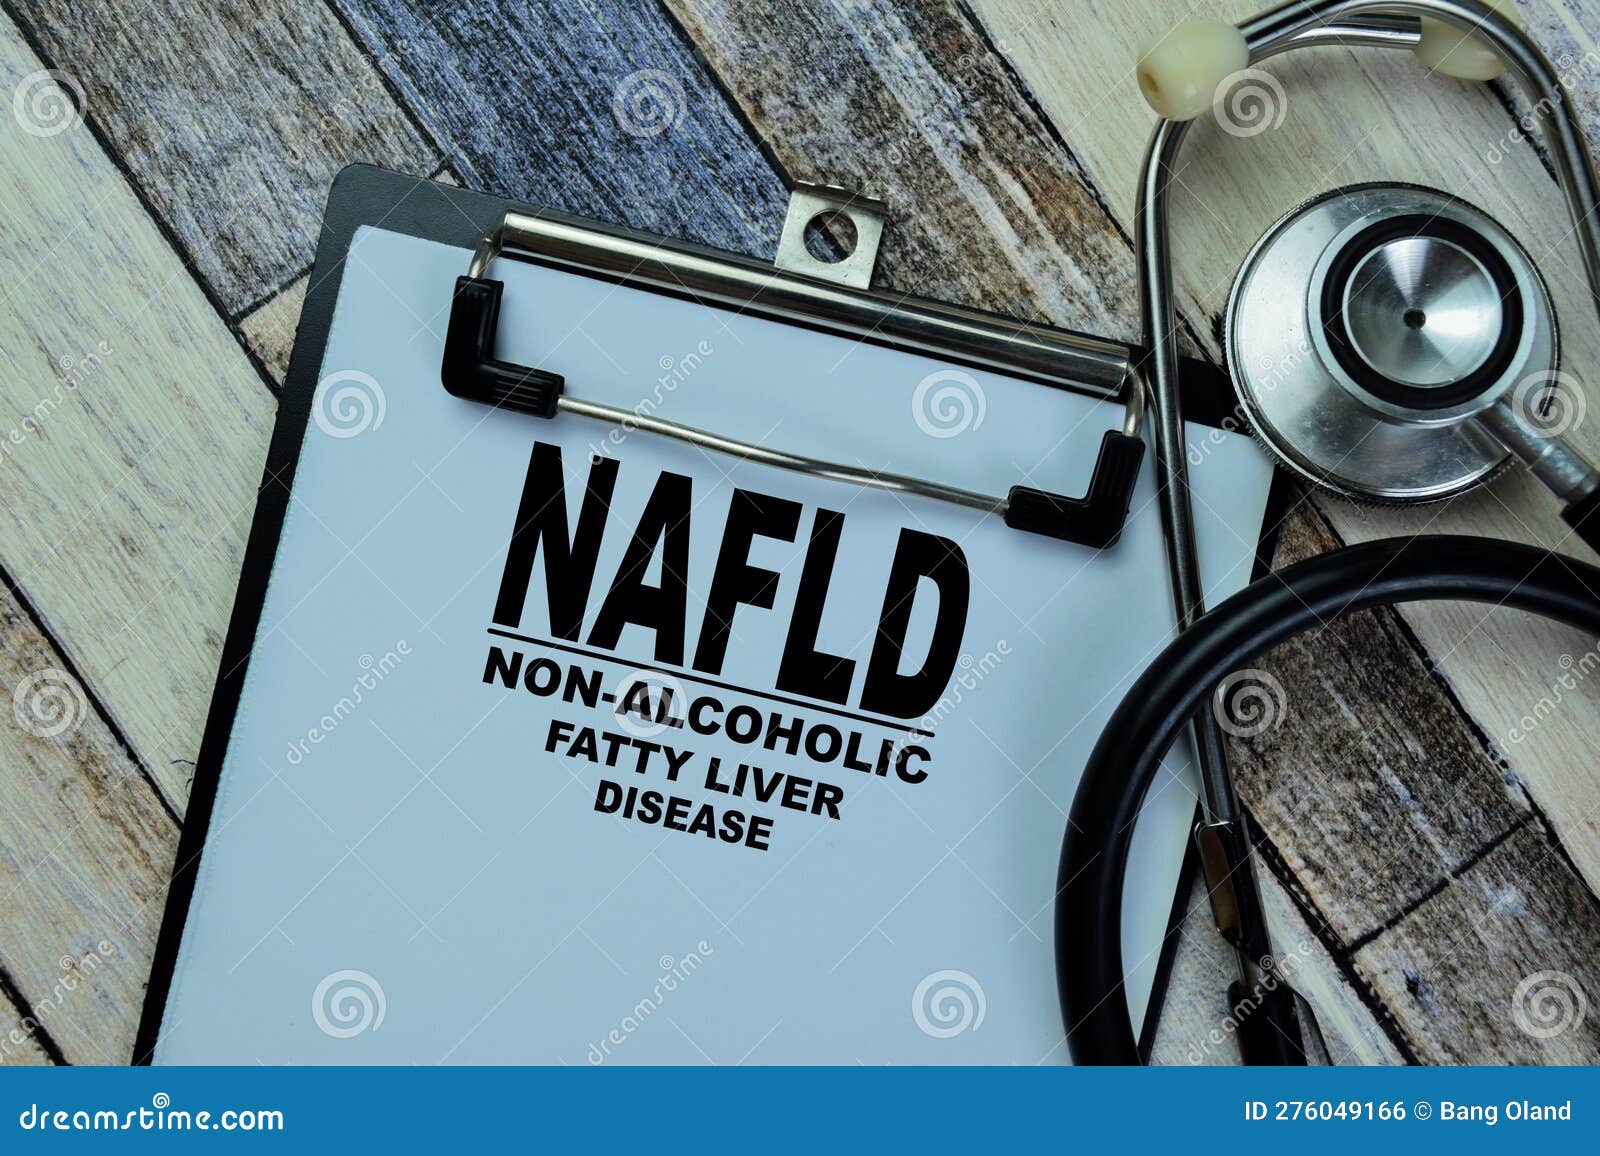 concept of nafld - non-alcoholic fatty liver disease write on paperwork with stethoscope  on wooden table